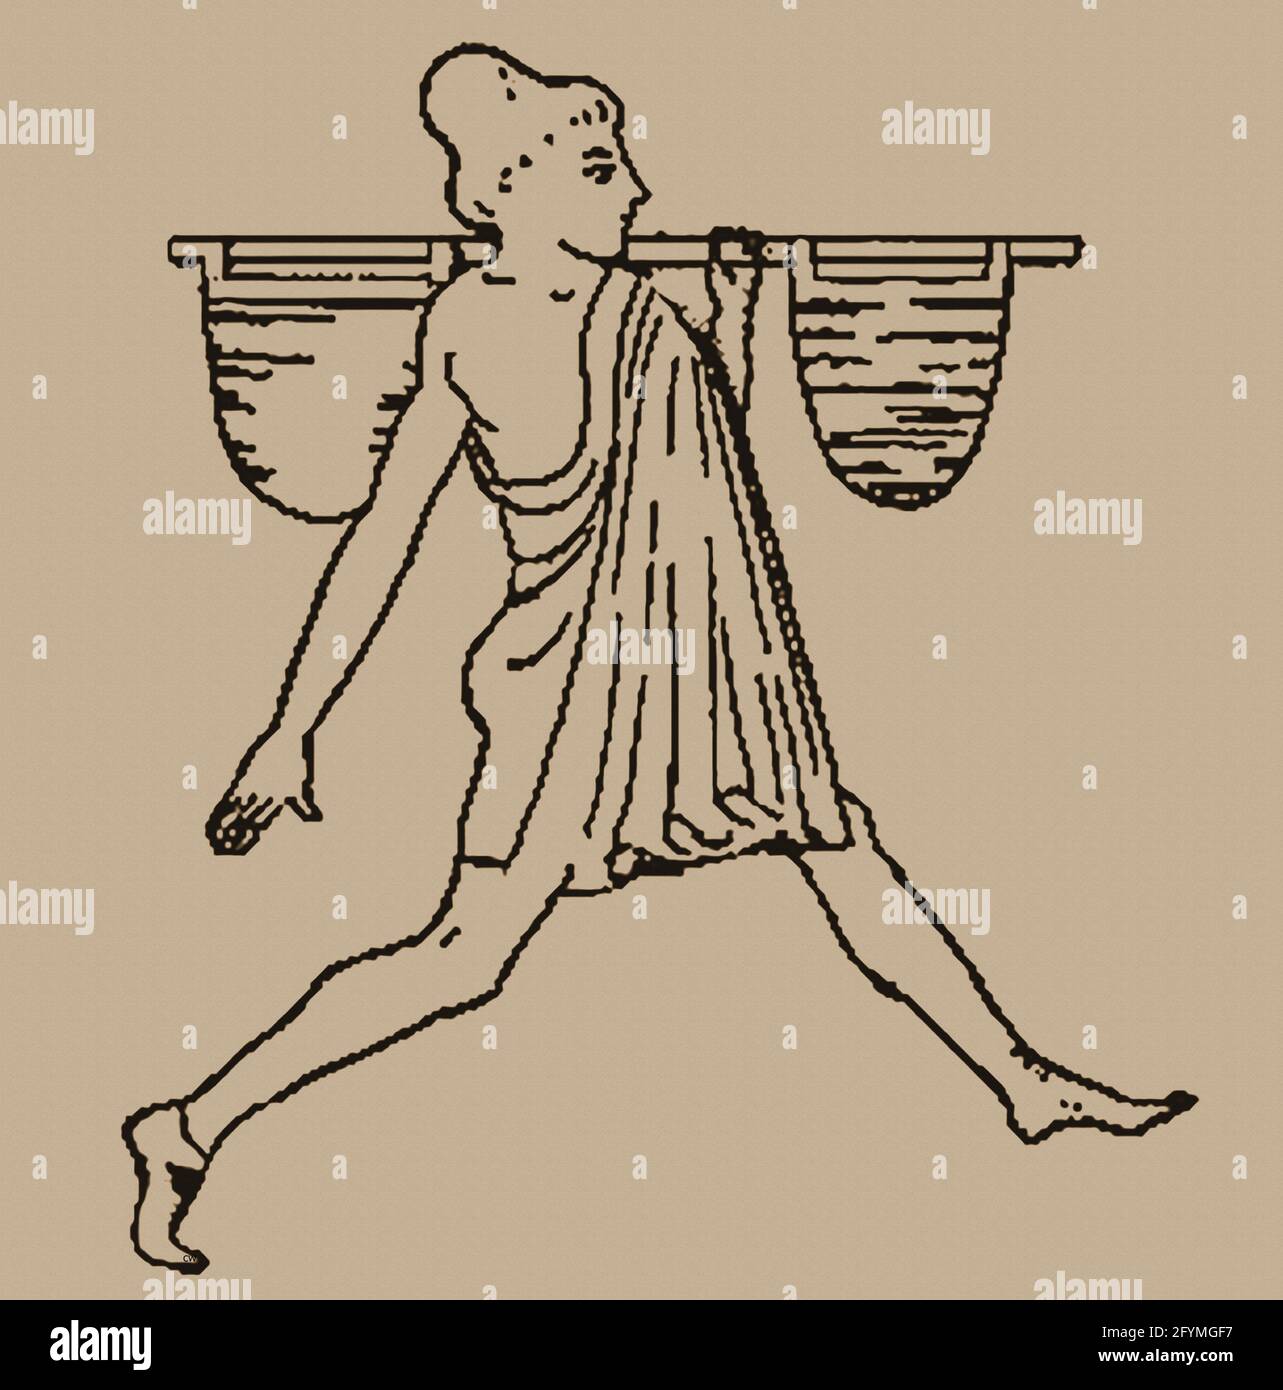 A 1914 illustration taken from an ancient Greek carving said to show a peasant or slave going to market but possibly showing a Greek water seller or  carrier . Slavery was an accepted practice in ancient Greece. The ancient Greeks had several words to indicate slaves depending on context (i.e. captured in war, employed servant, an adopted houseboy, farm labourer etc). The marrying of freemen and women and slaves was not uncommon, indicating a complex structure in their relationships and in the common perception of their place , individual status or situation  in society. Stock Photo